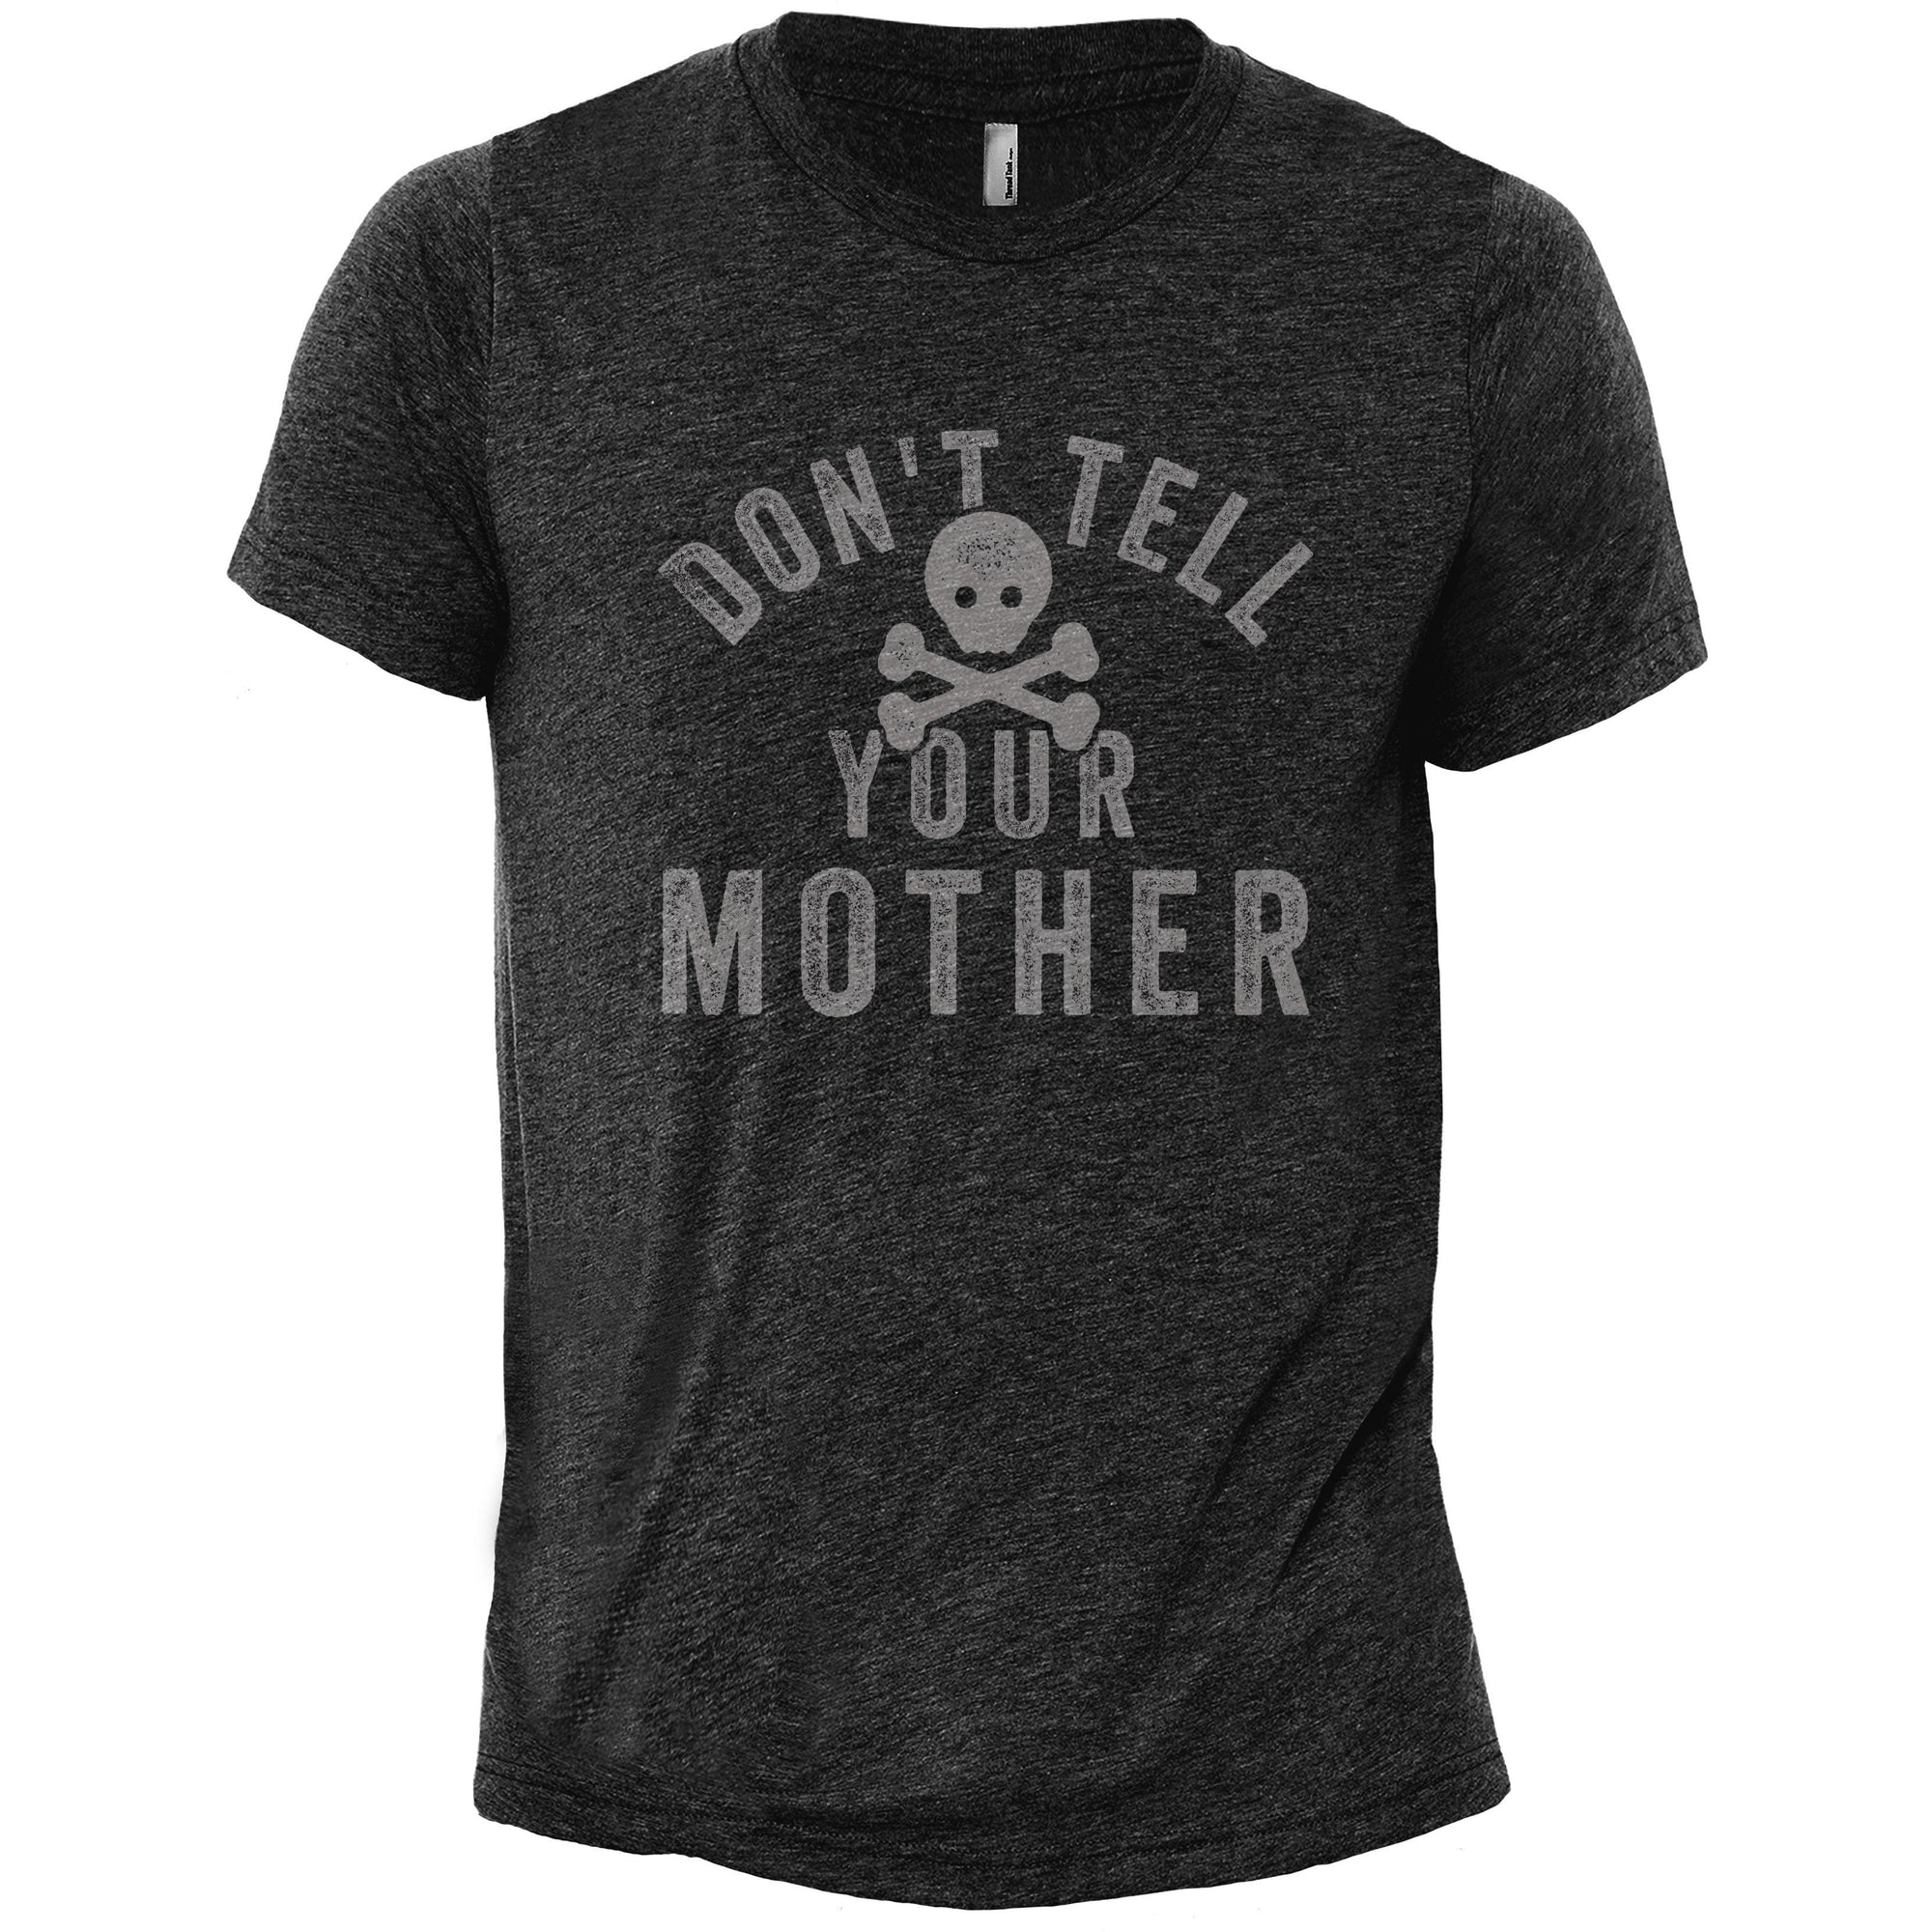 Don't Tell Your Mother - thread tank | Stories you can wear.